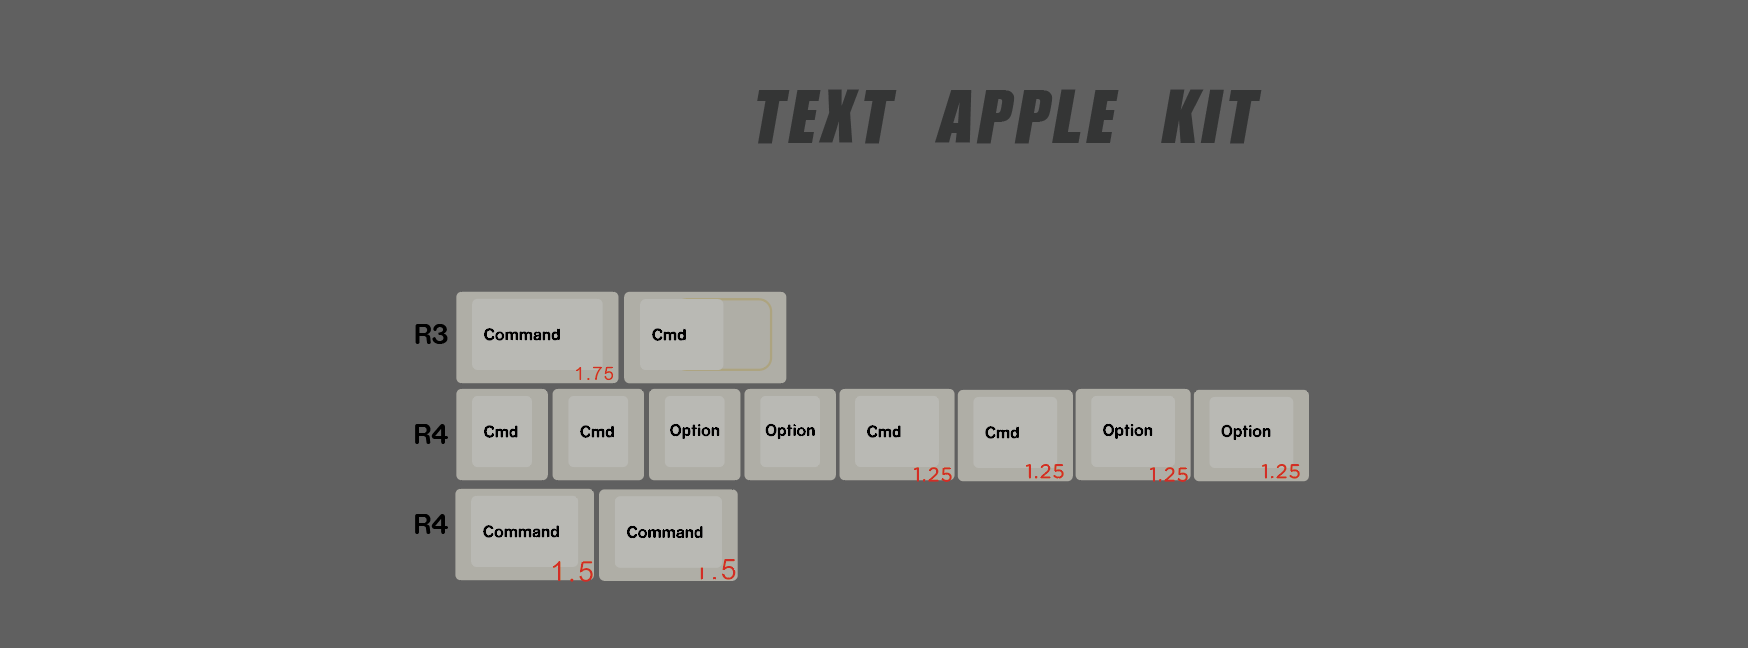 TEXT APPLE.png